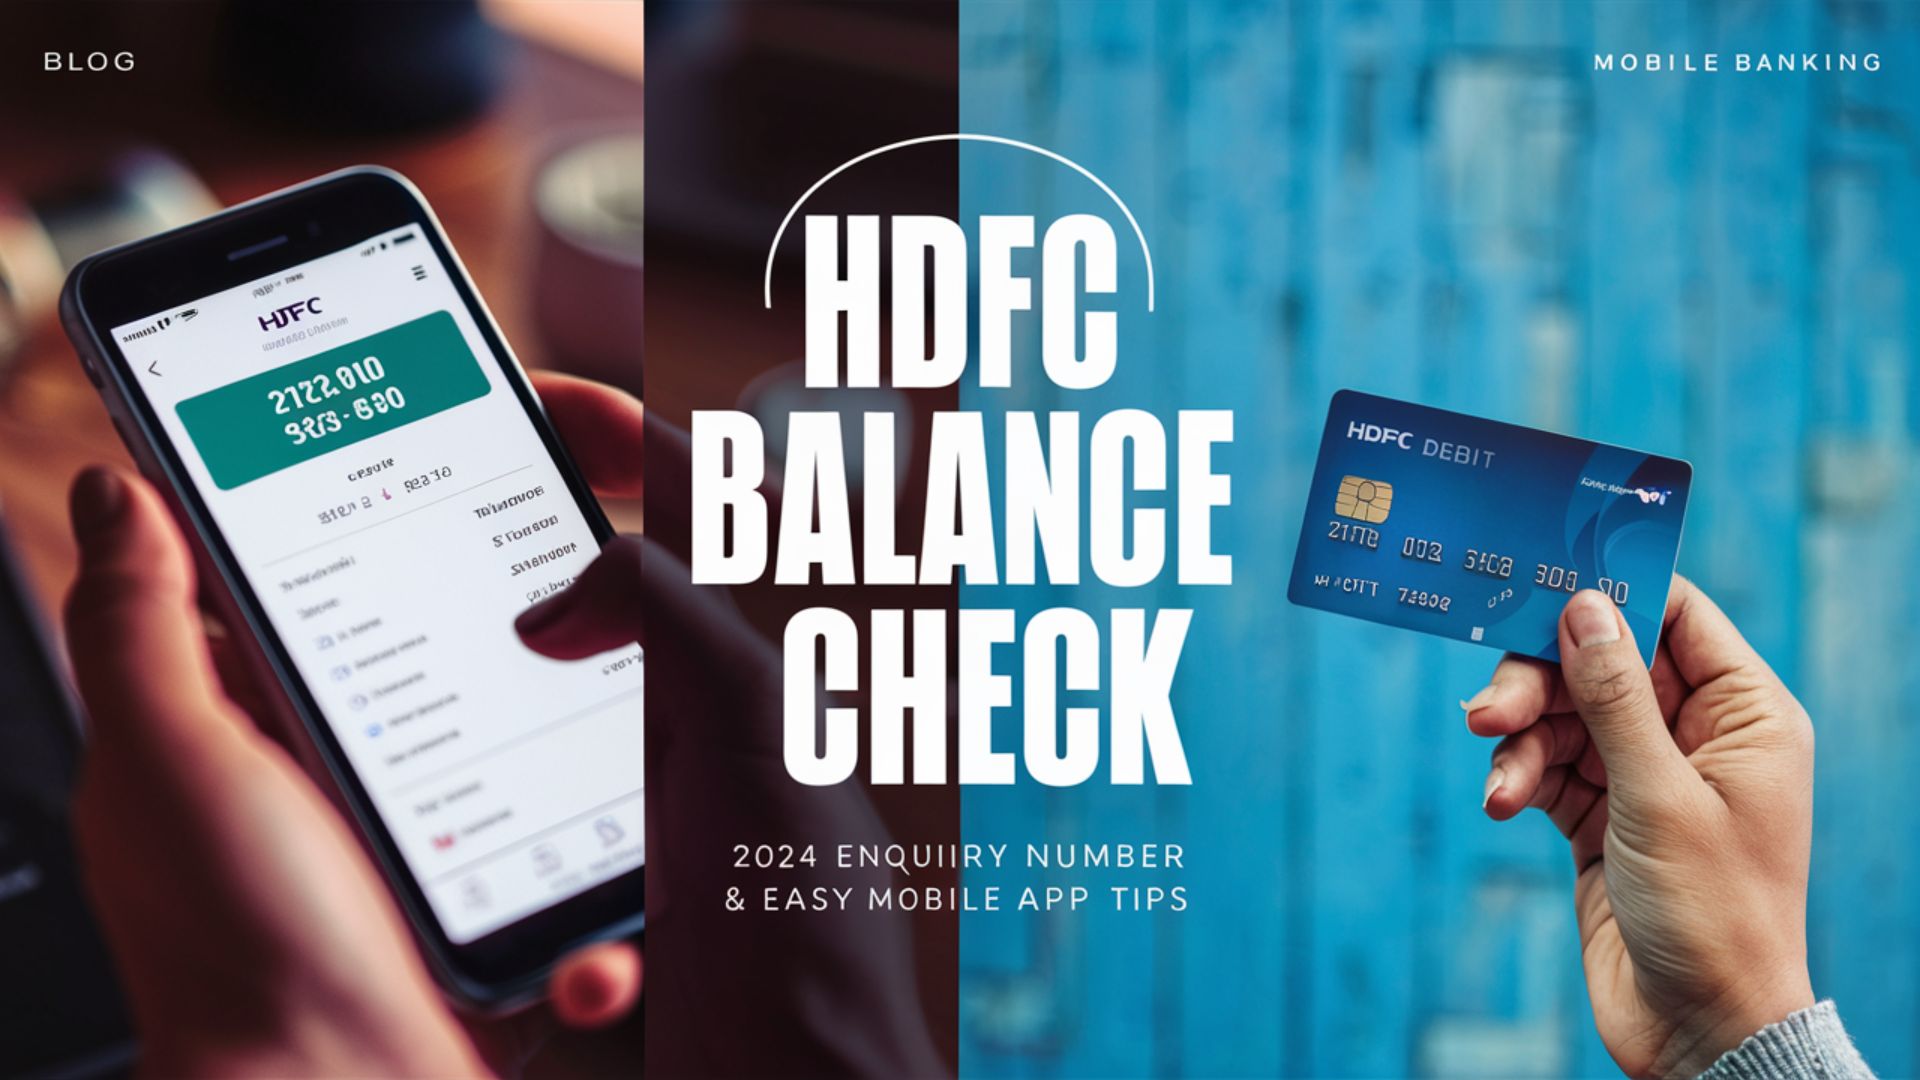 HDFC Balance Enquiry Number 2024